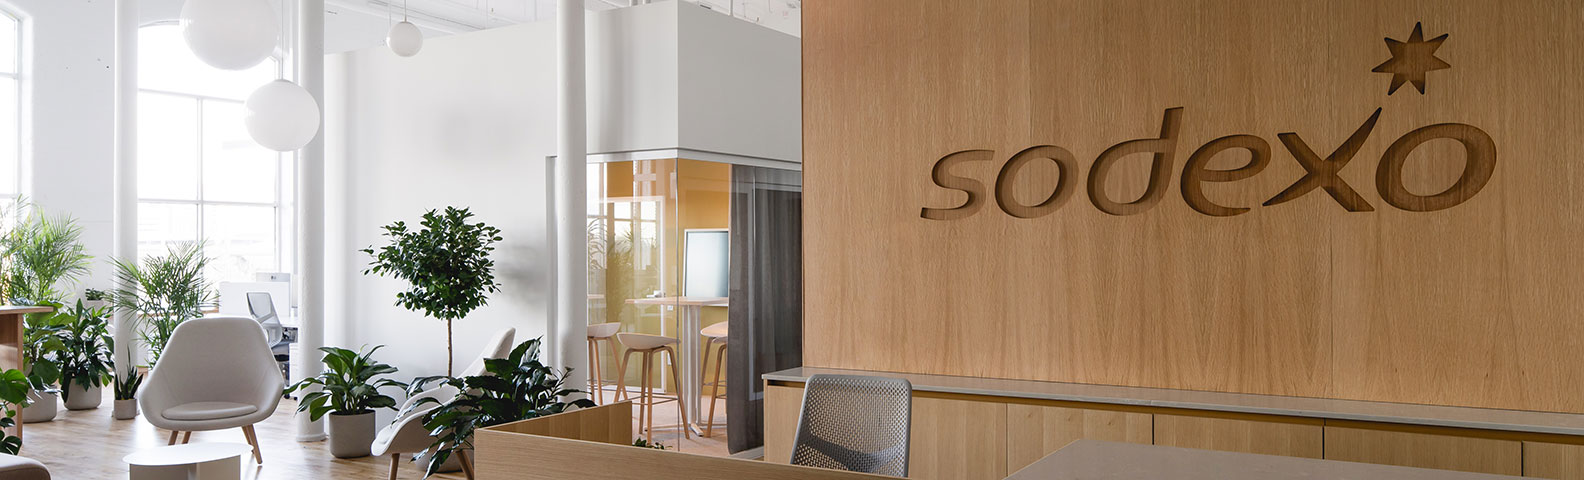 image of sodexo logo on wall in montreal office